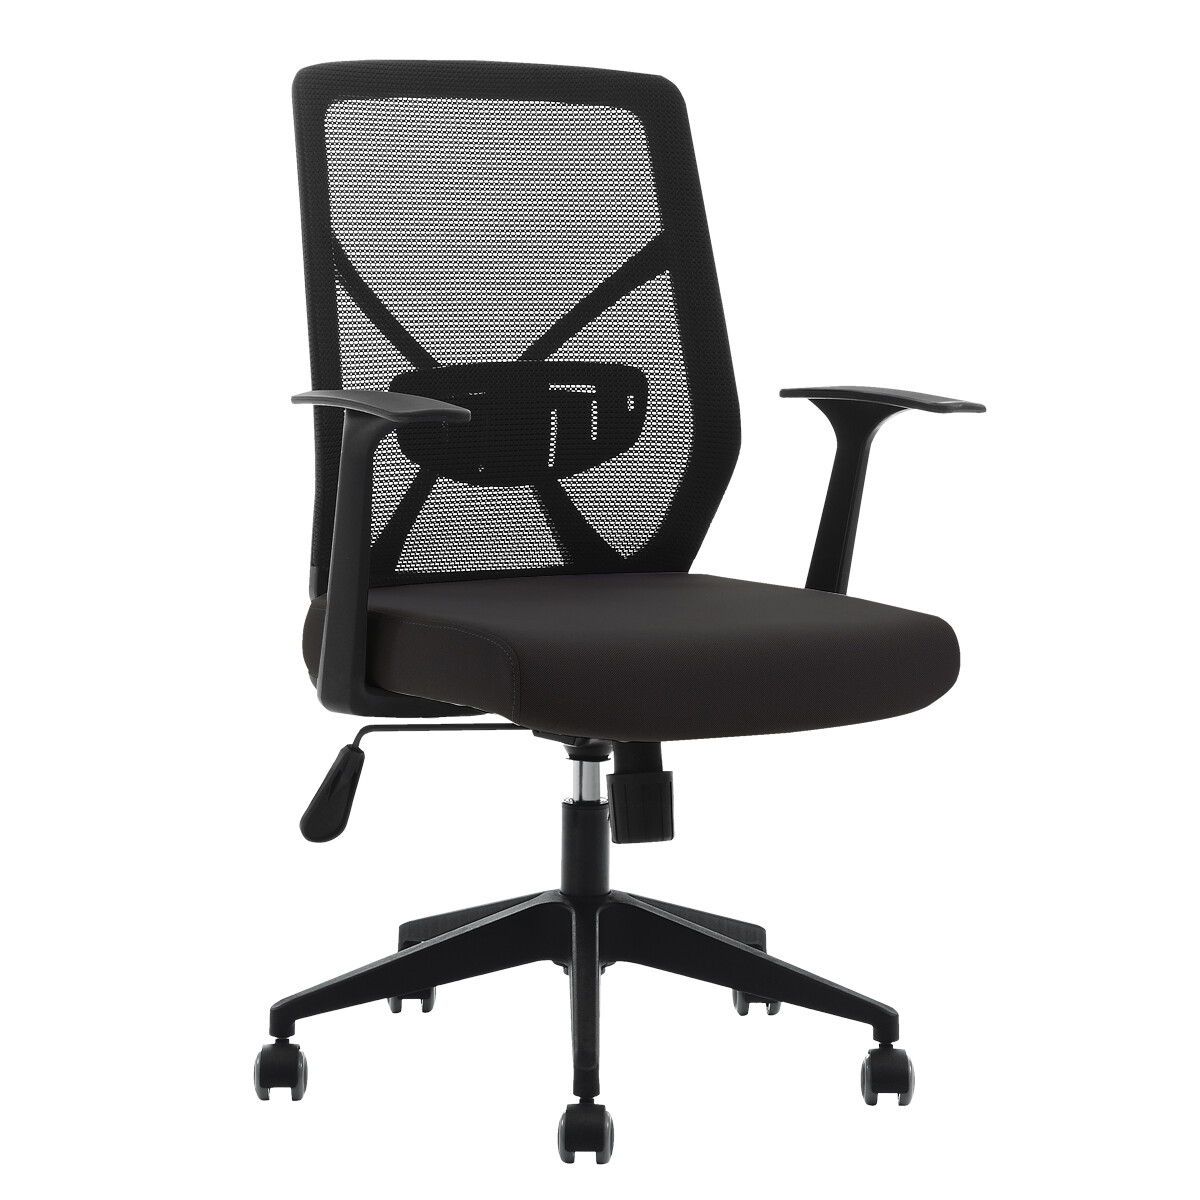 Neptune Spark Pro Ergonomic Chair for Adults